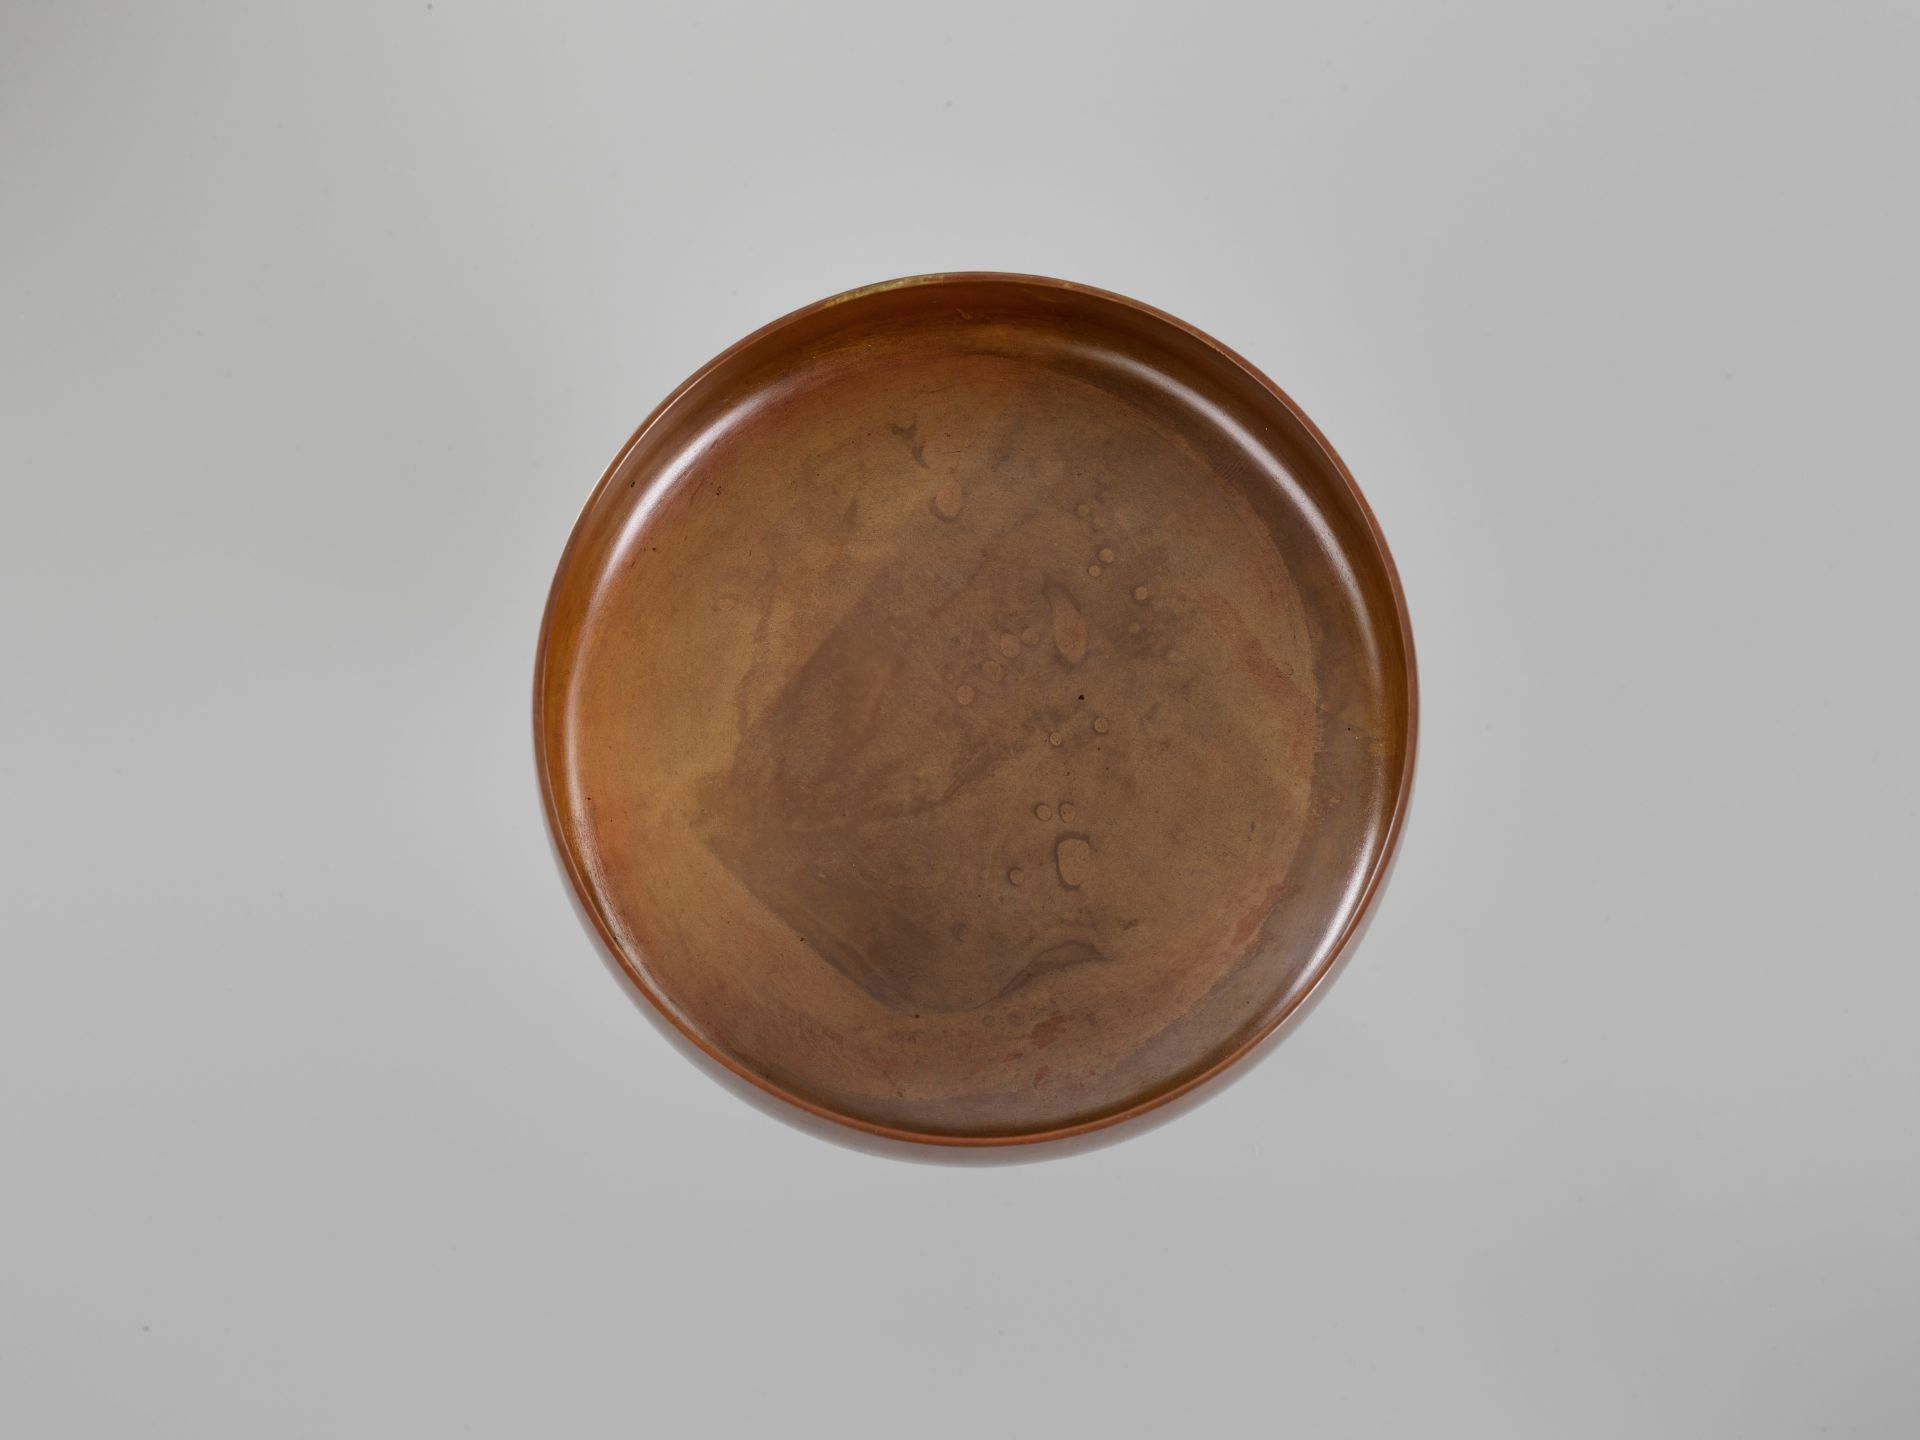 INOUE OF KYOTO: A SUPERB AND LARGE CIRCULAR INLAID BRONZE BOX AND COVER - Image 6 of 9